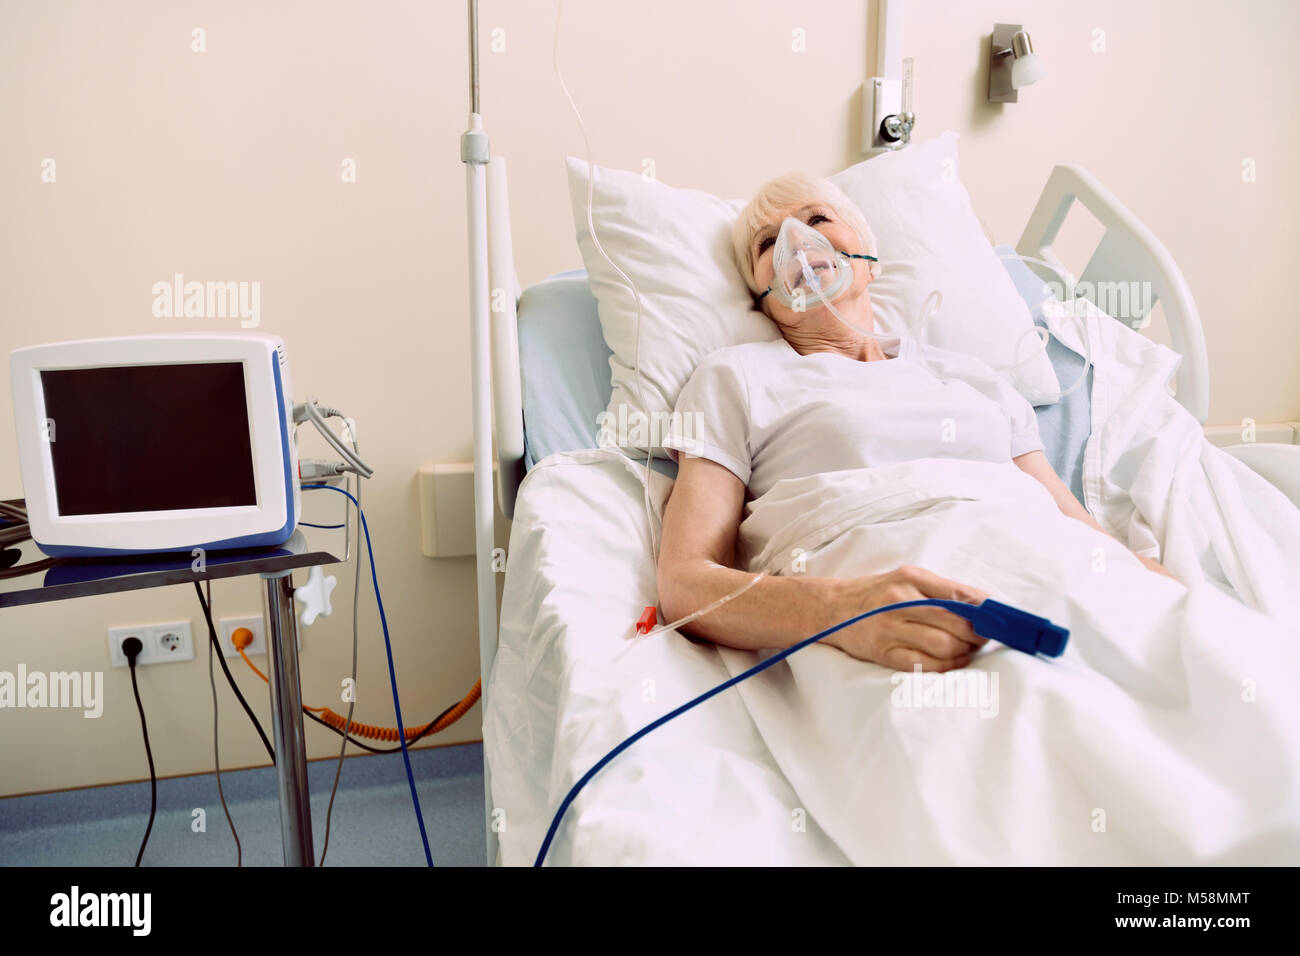 Retired lady lying in hospital bed with respiratory support Stock Photo